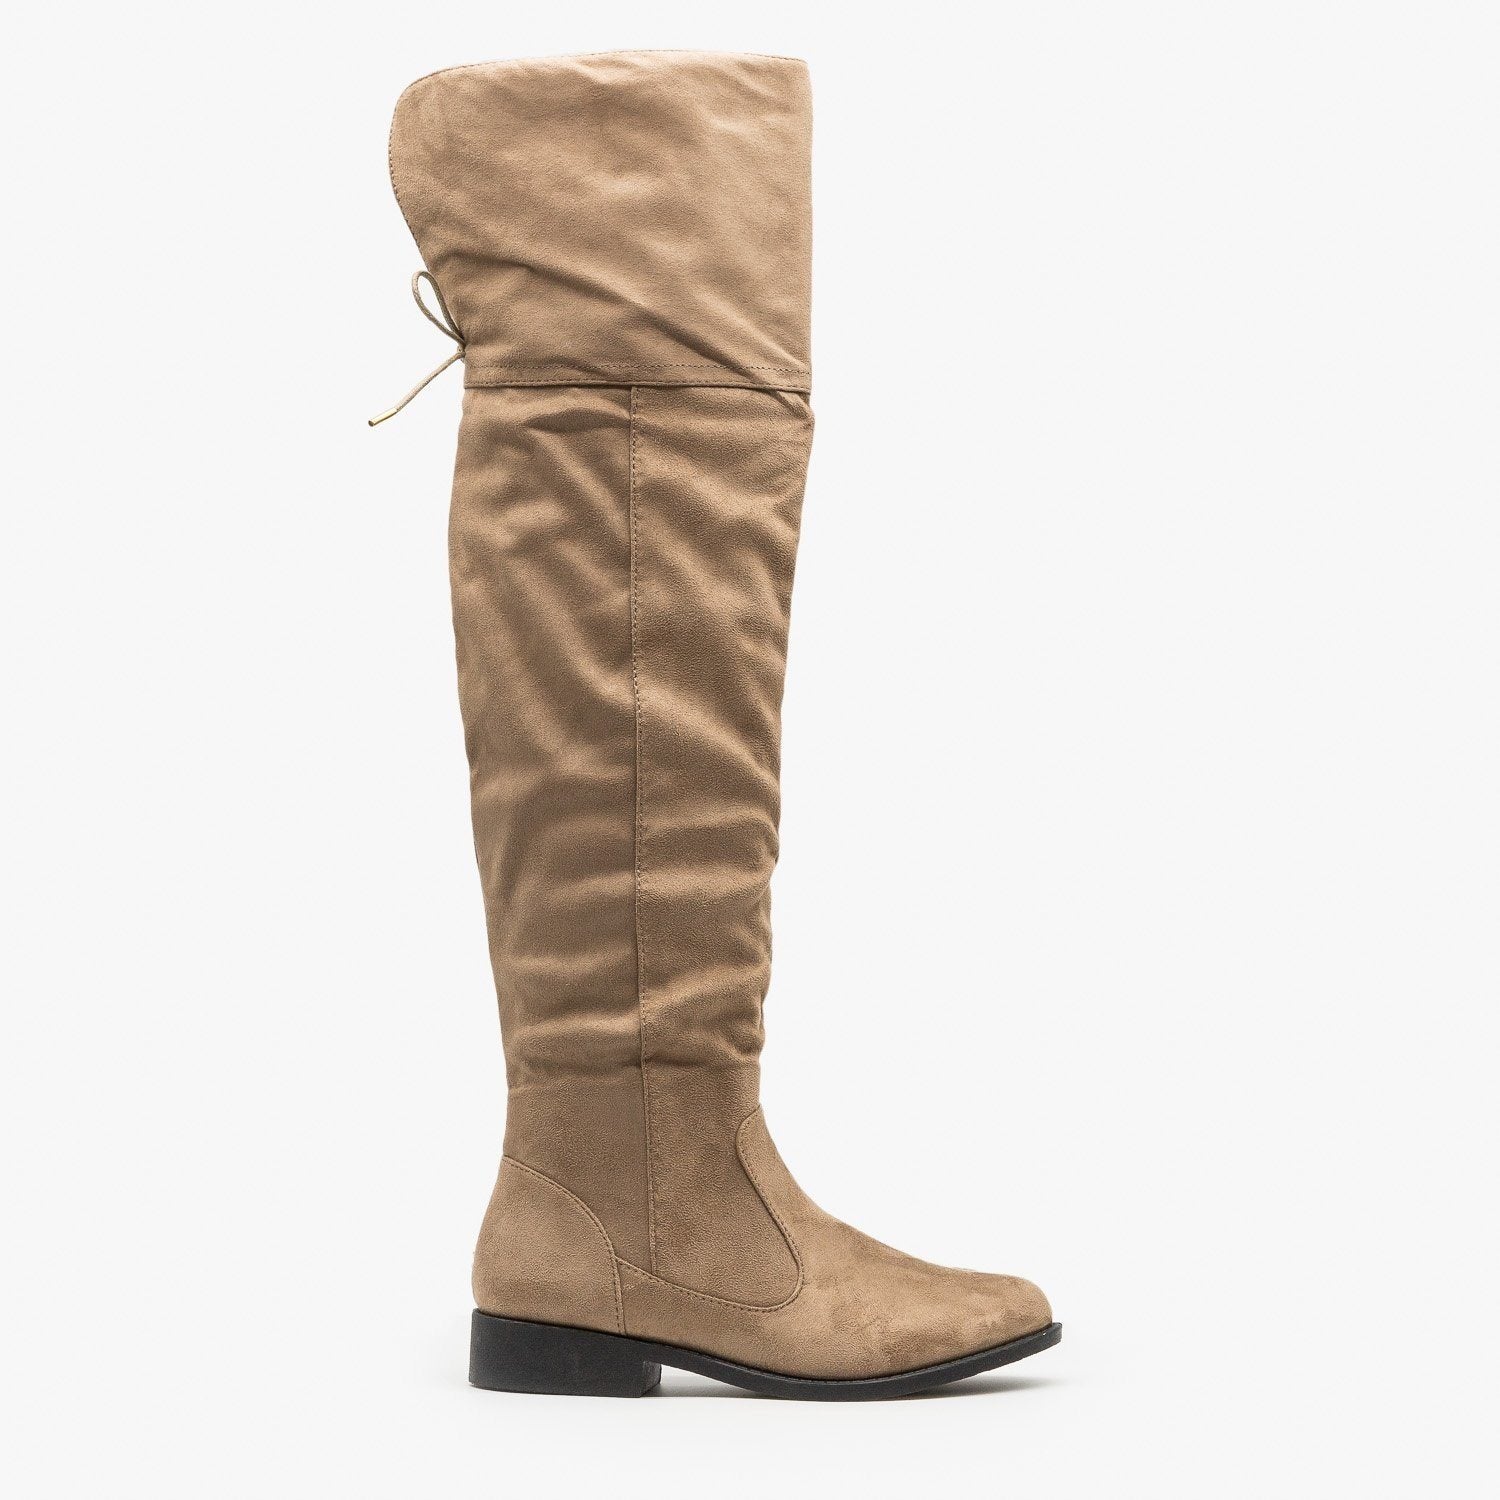 over the knee riding boots